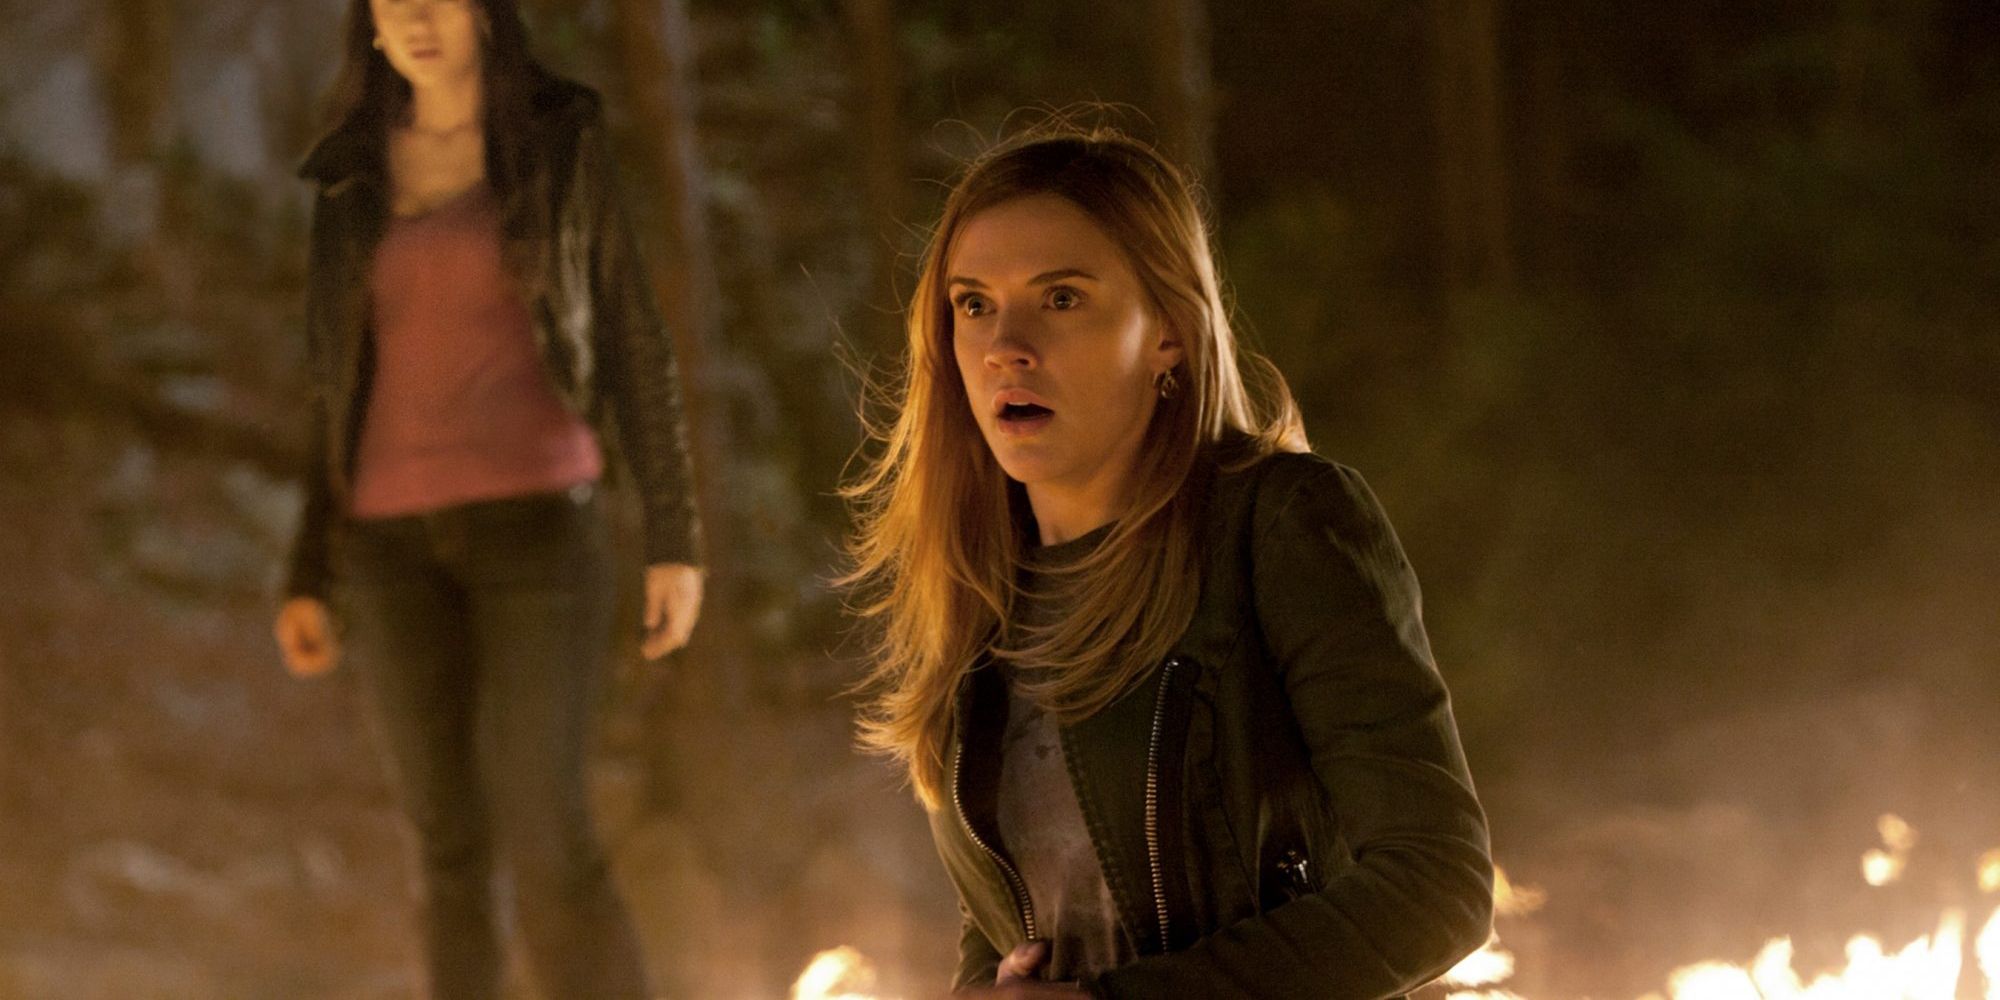 Jenna Sommers as a vampire in The Vampire Diaries.